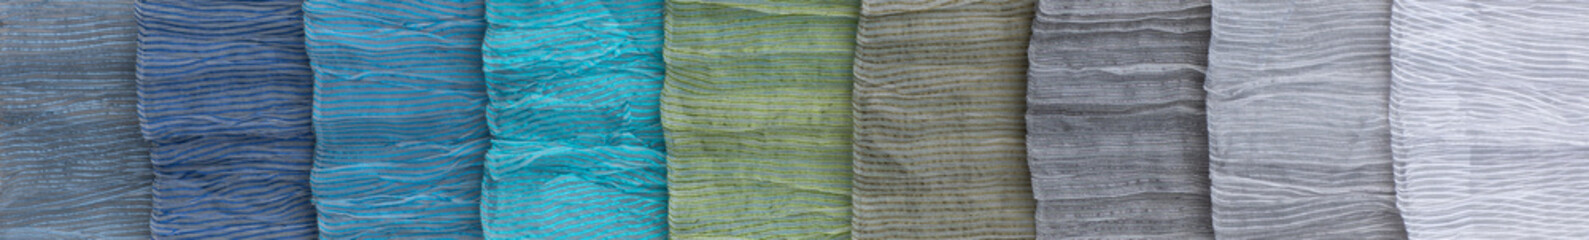 Colorful upholstery fabric samples in store